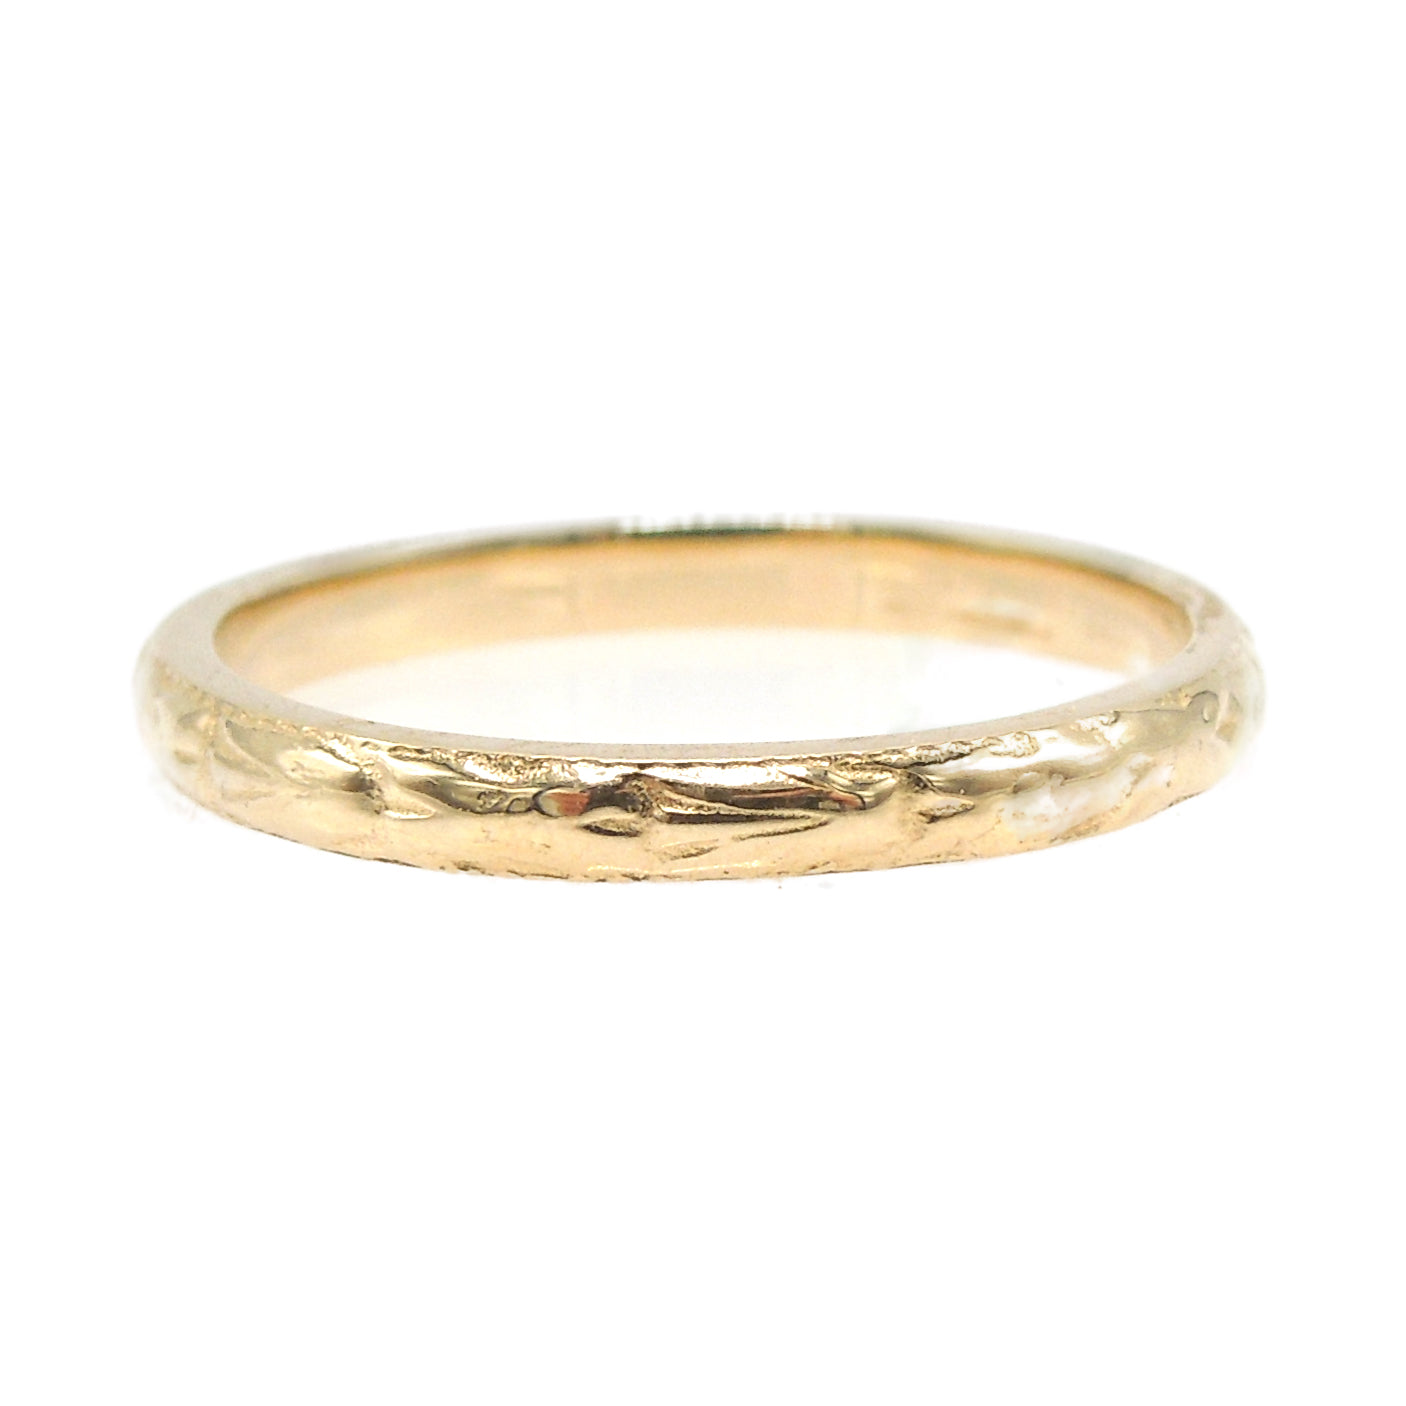 Art Deco Style Engraved Wedding Band in White, Yellow or Rose Gold